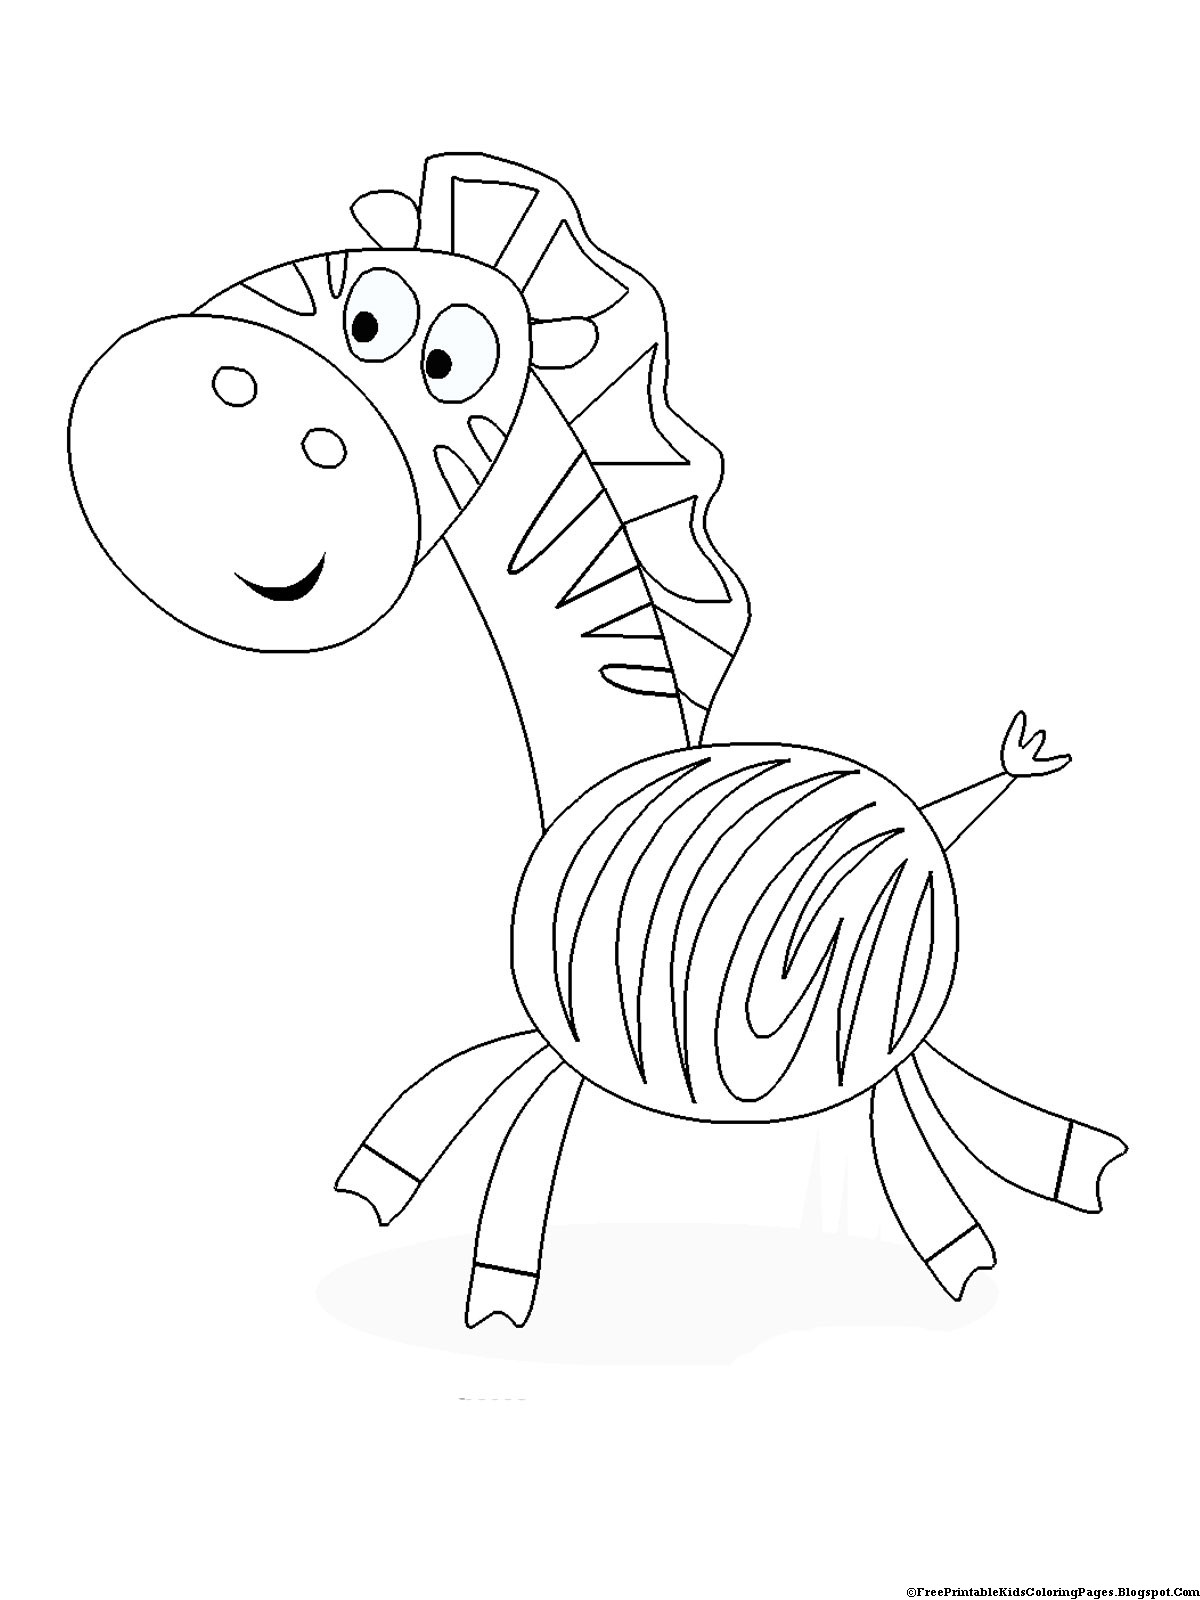 Free Coloring Sheets To Print
 Zebra Coloring Pages Free Printable Kids Coloring Pages